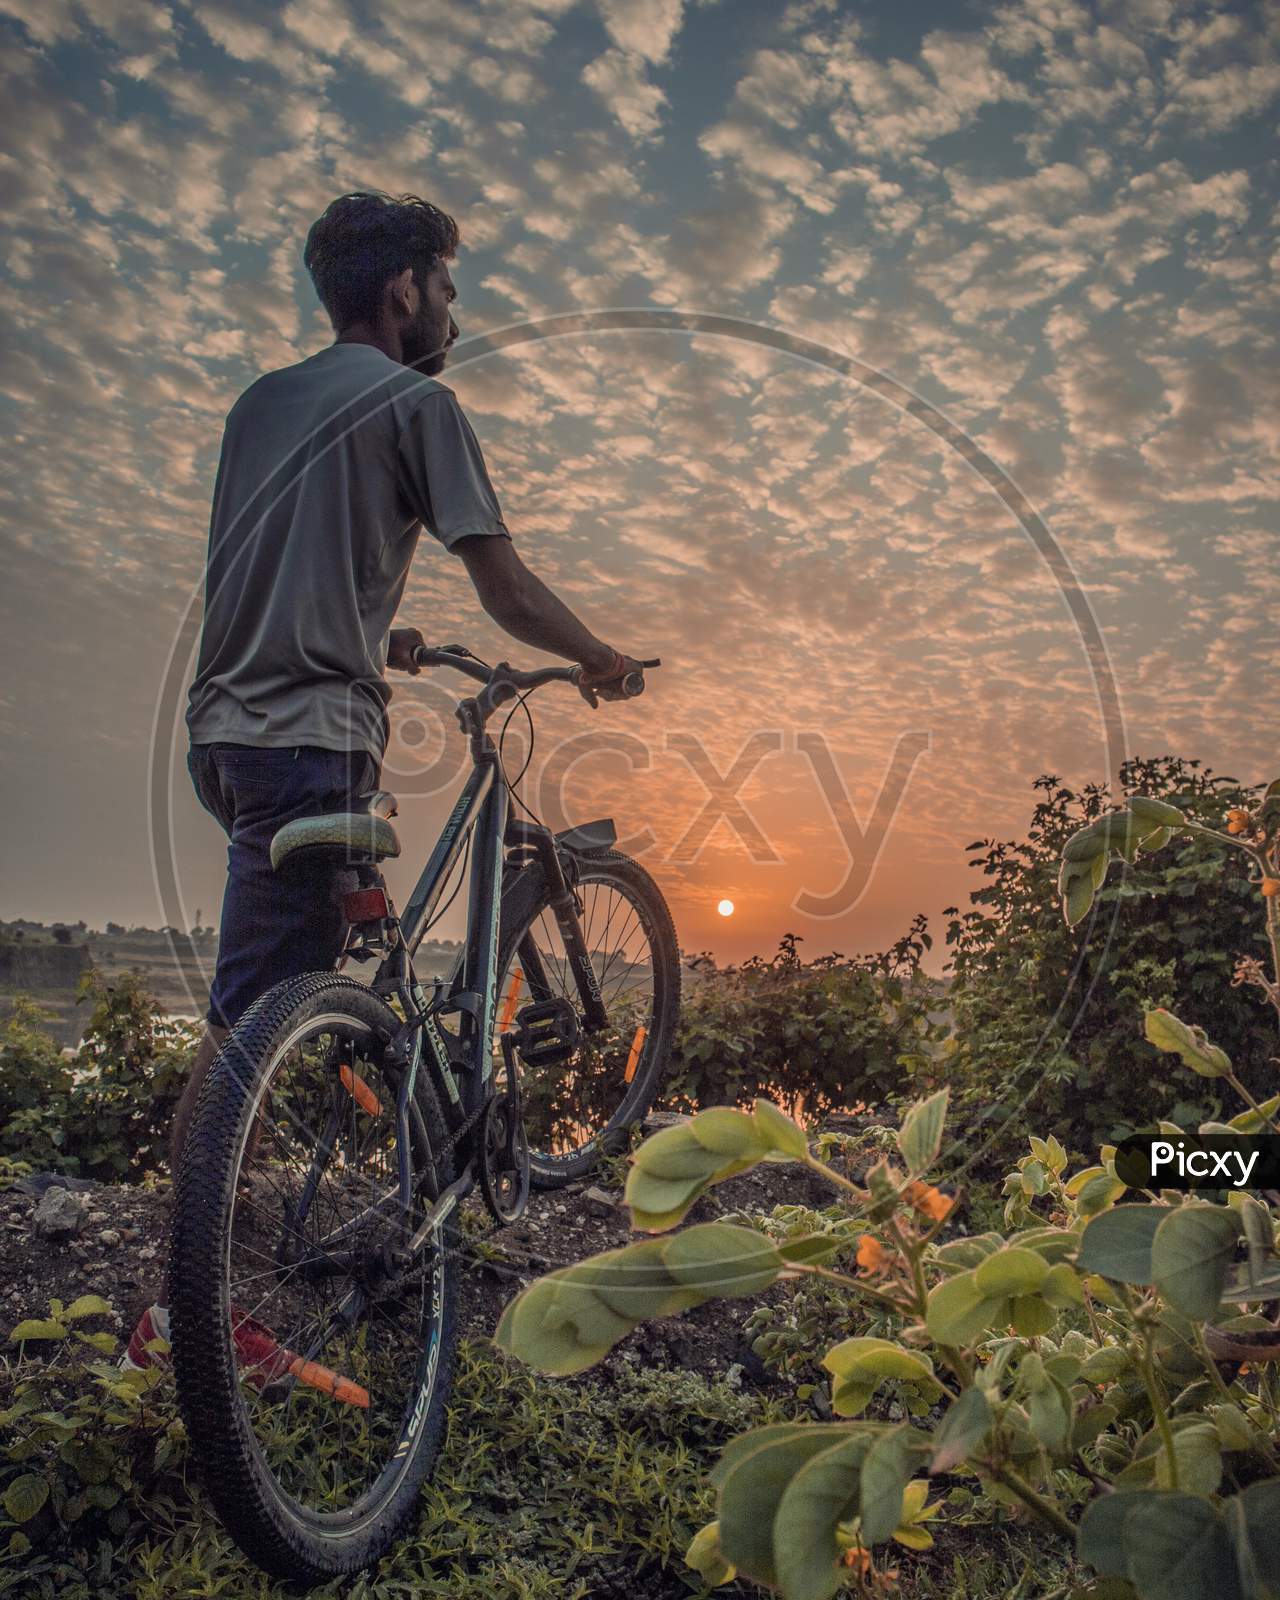 Sunrise with cycle